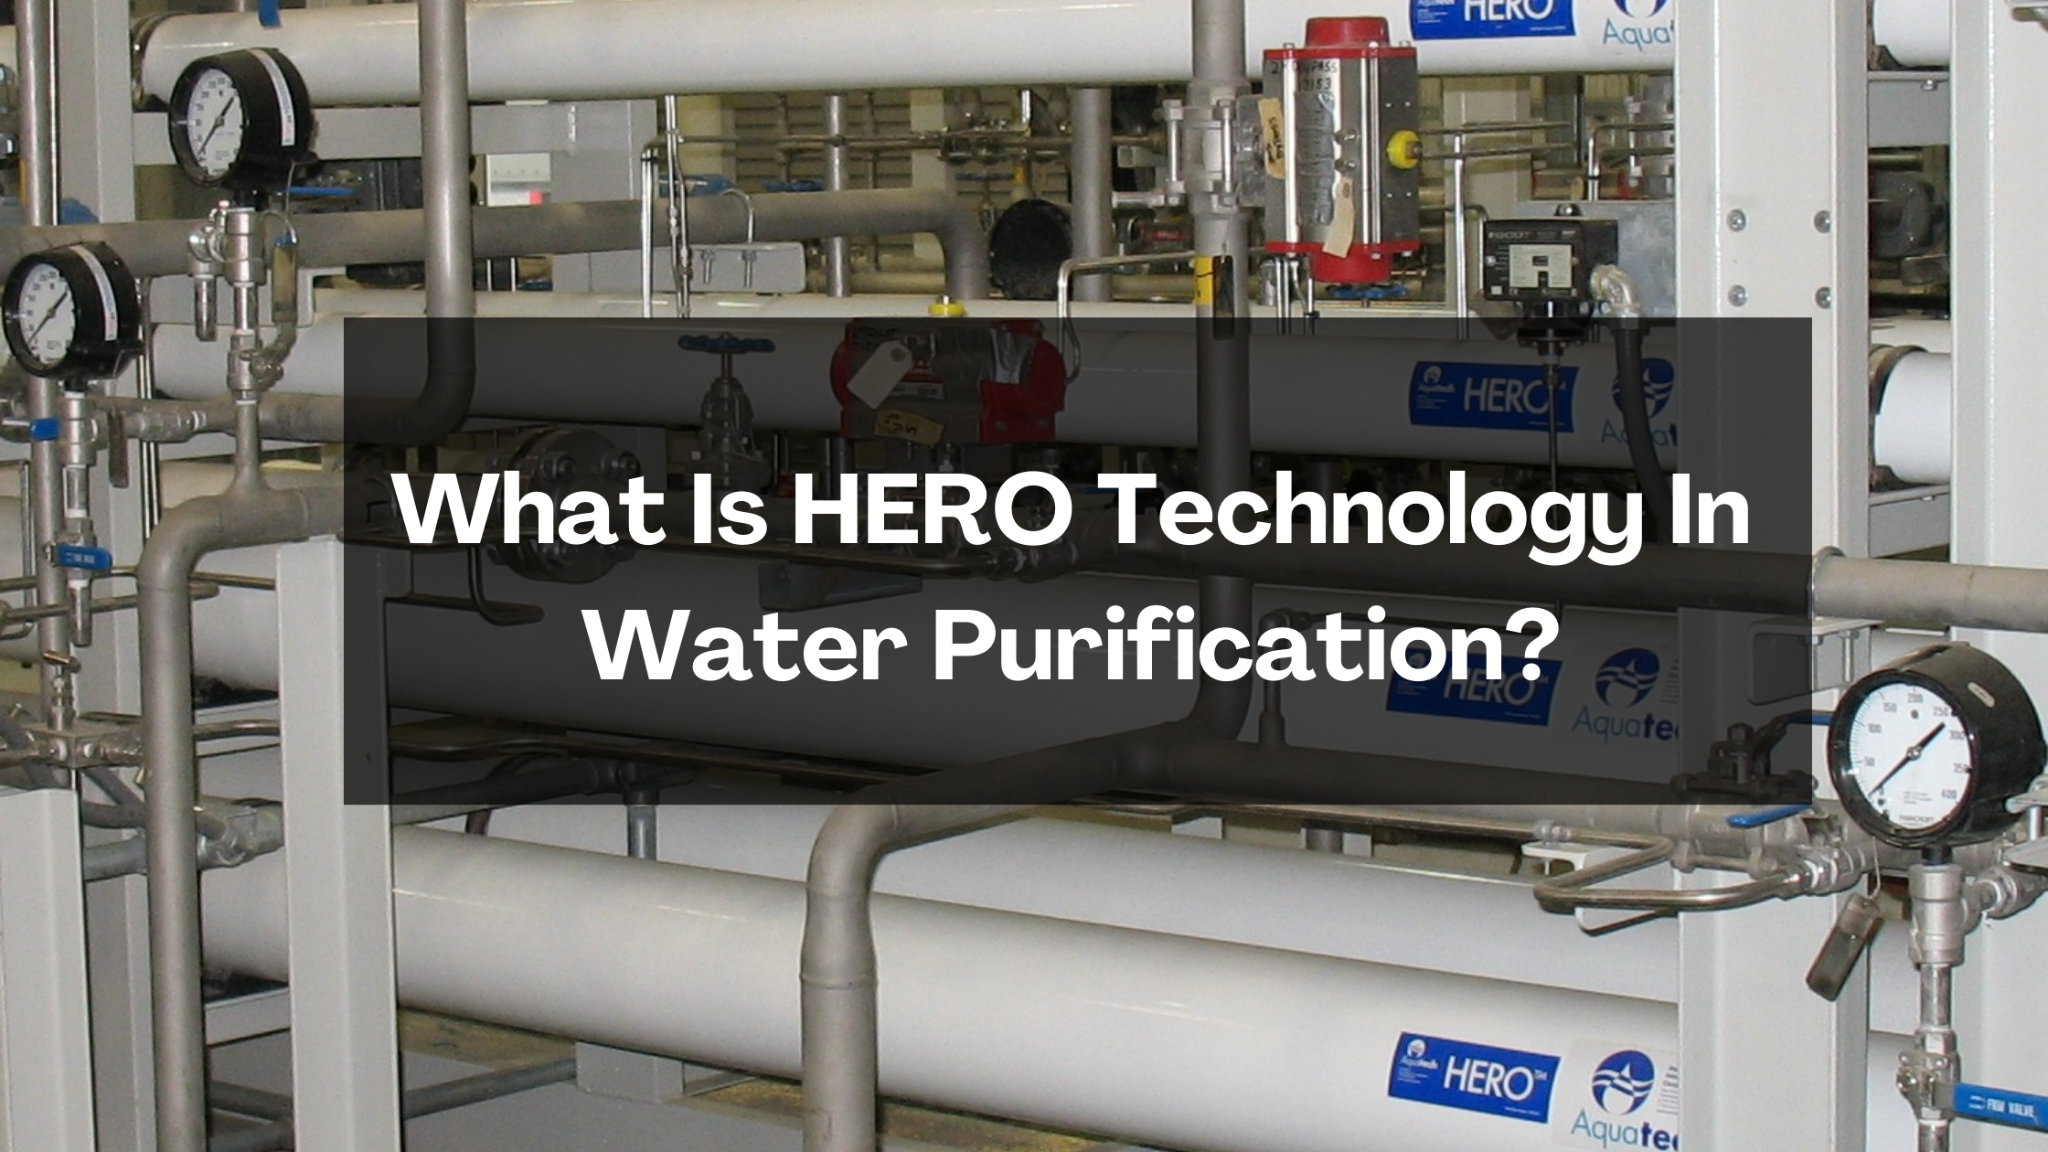 HERO Technology In Water Purification